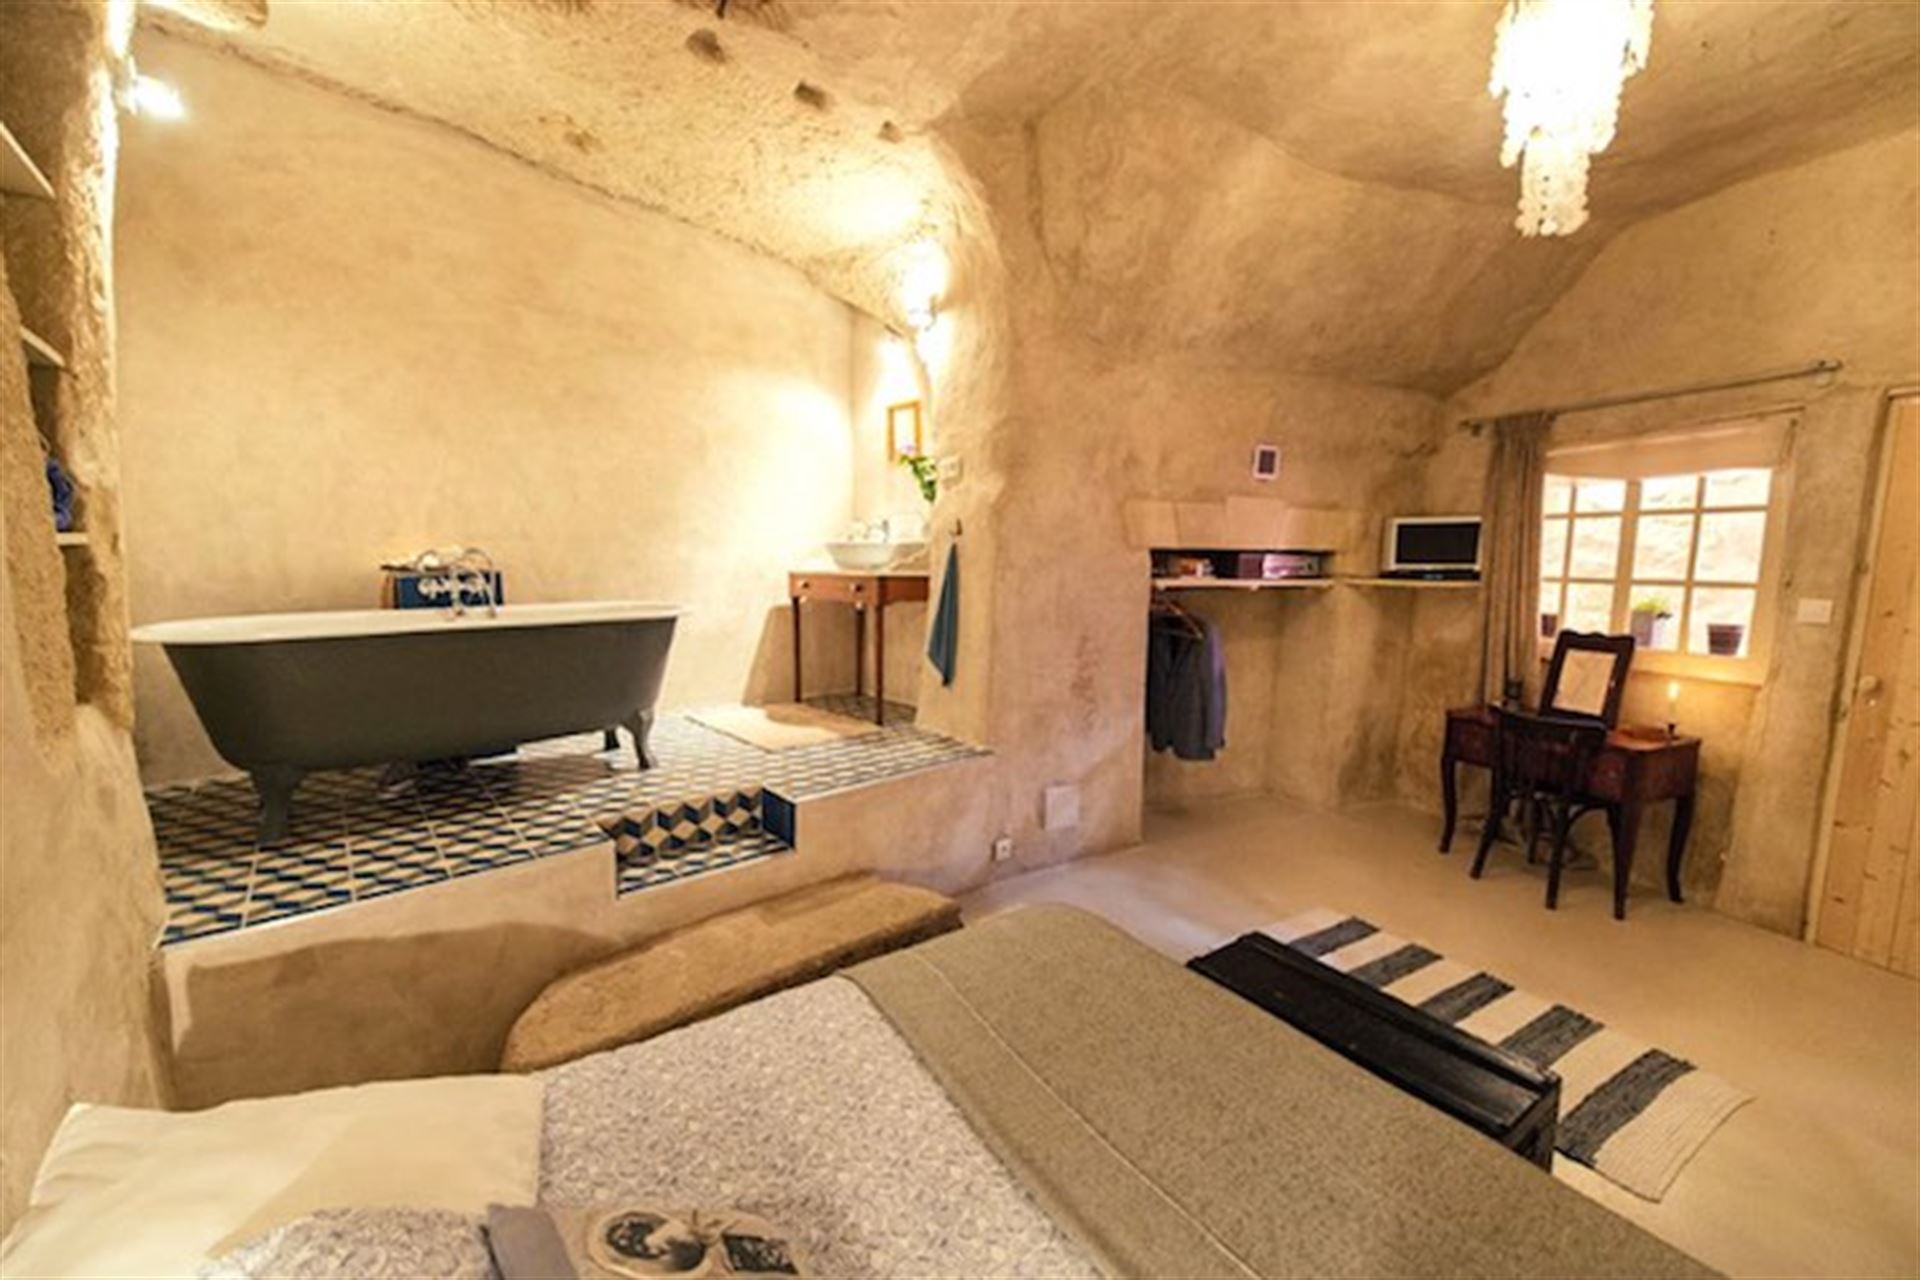 Discover These 5 Cave Homes and It's Incredible Interior Design